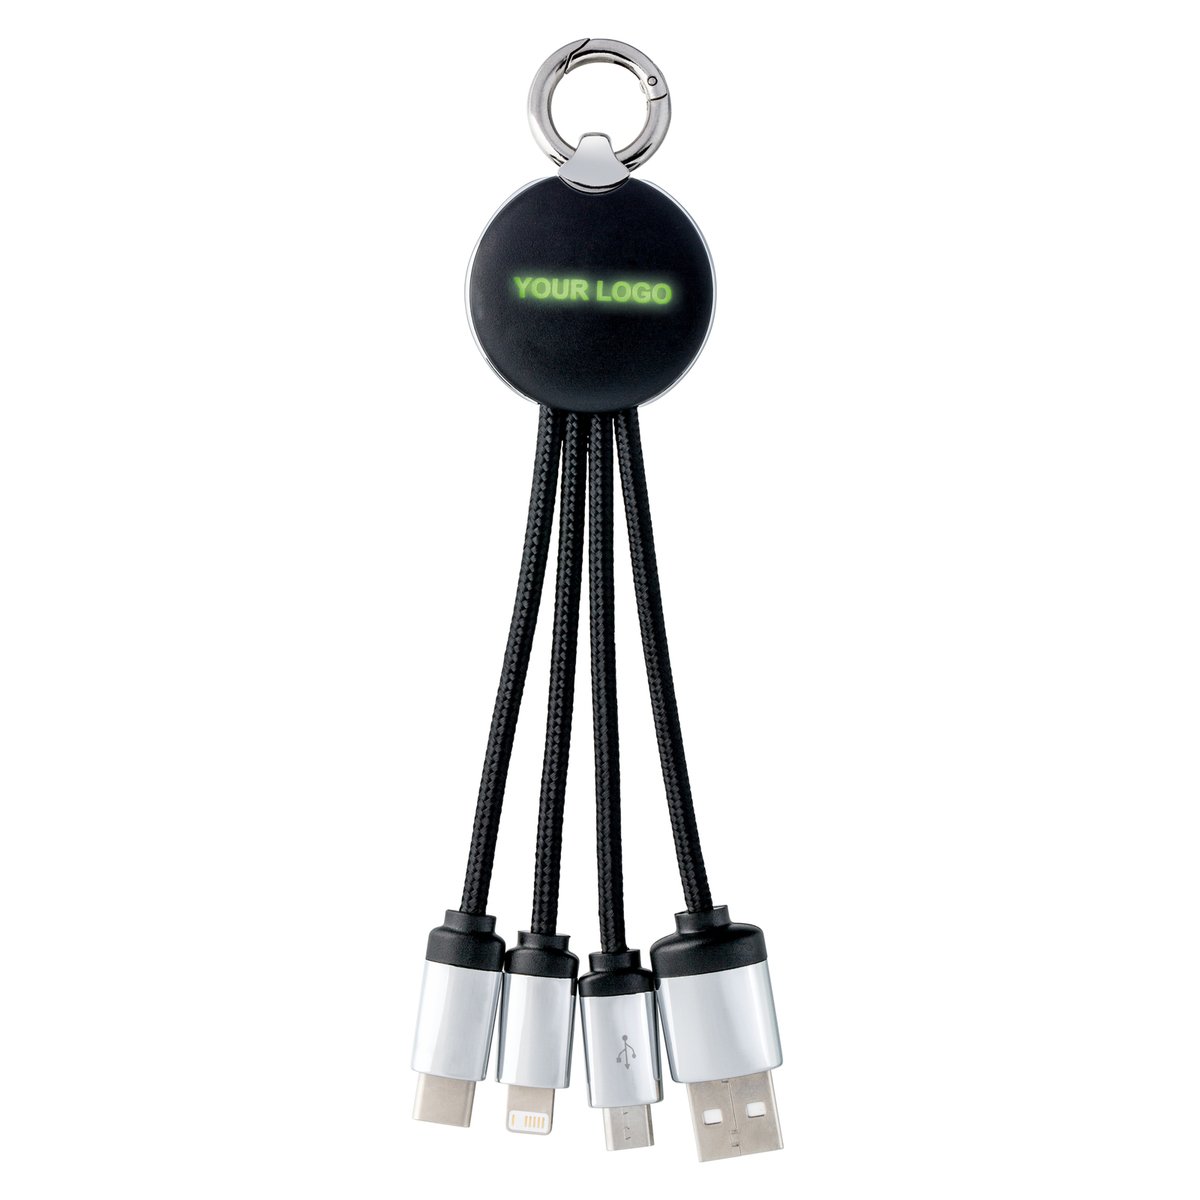 3-in-1 Charging Cable with Light REEVES-PUHALANI black/green